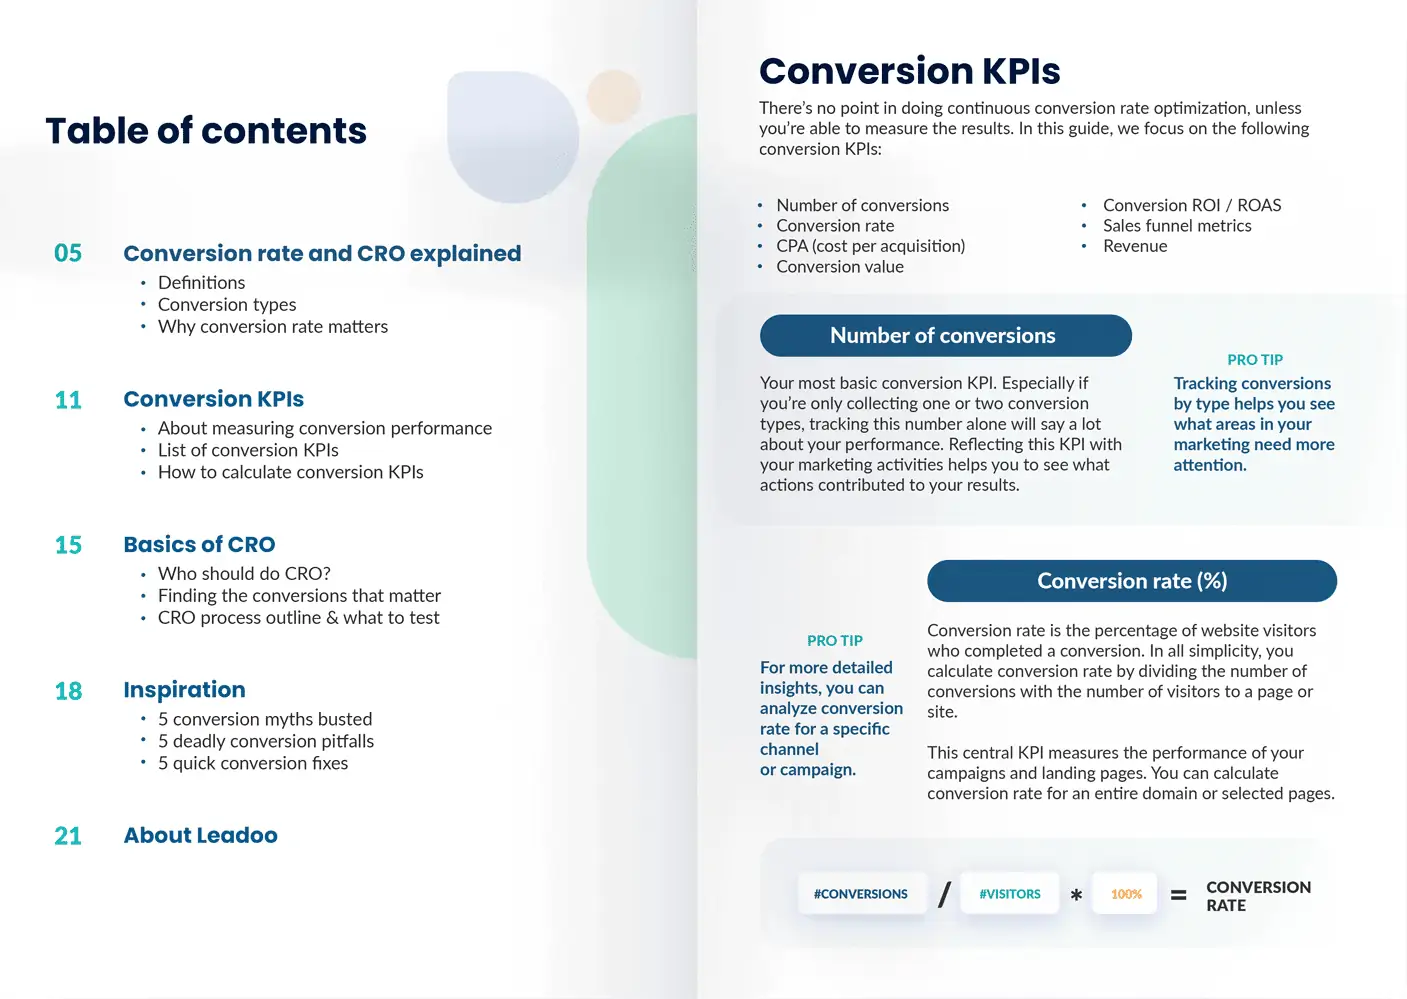 page-Conversion-Rate-leadoo-02-02